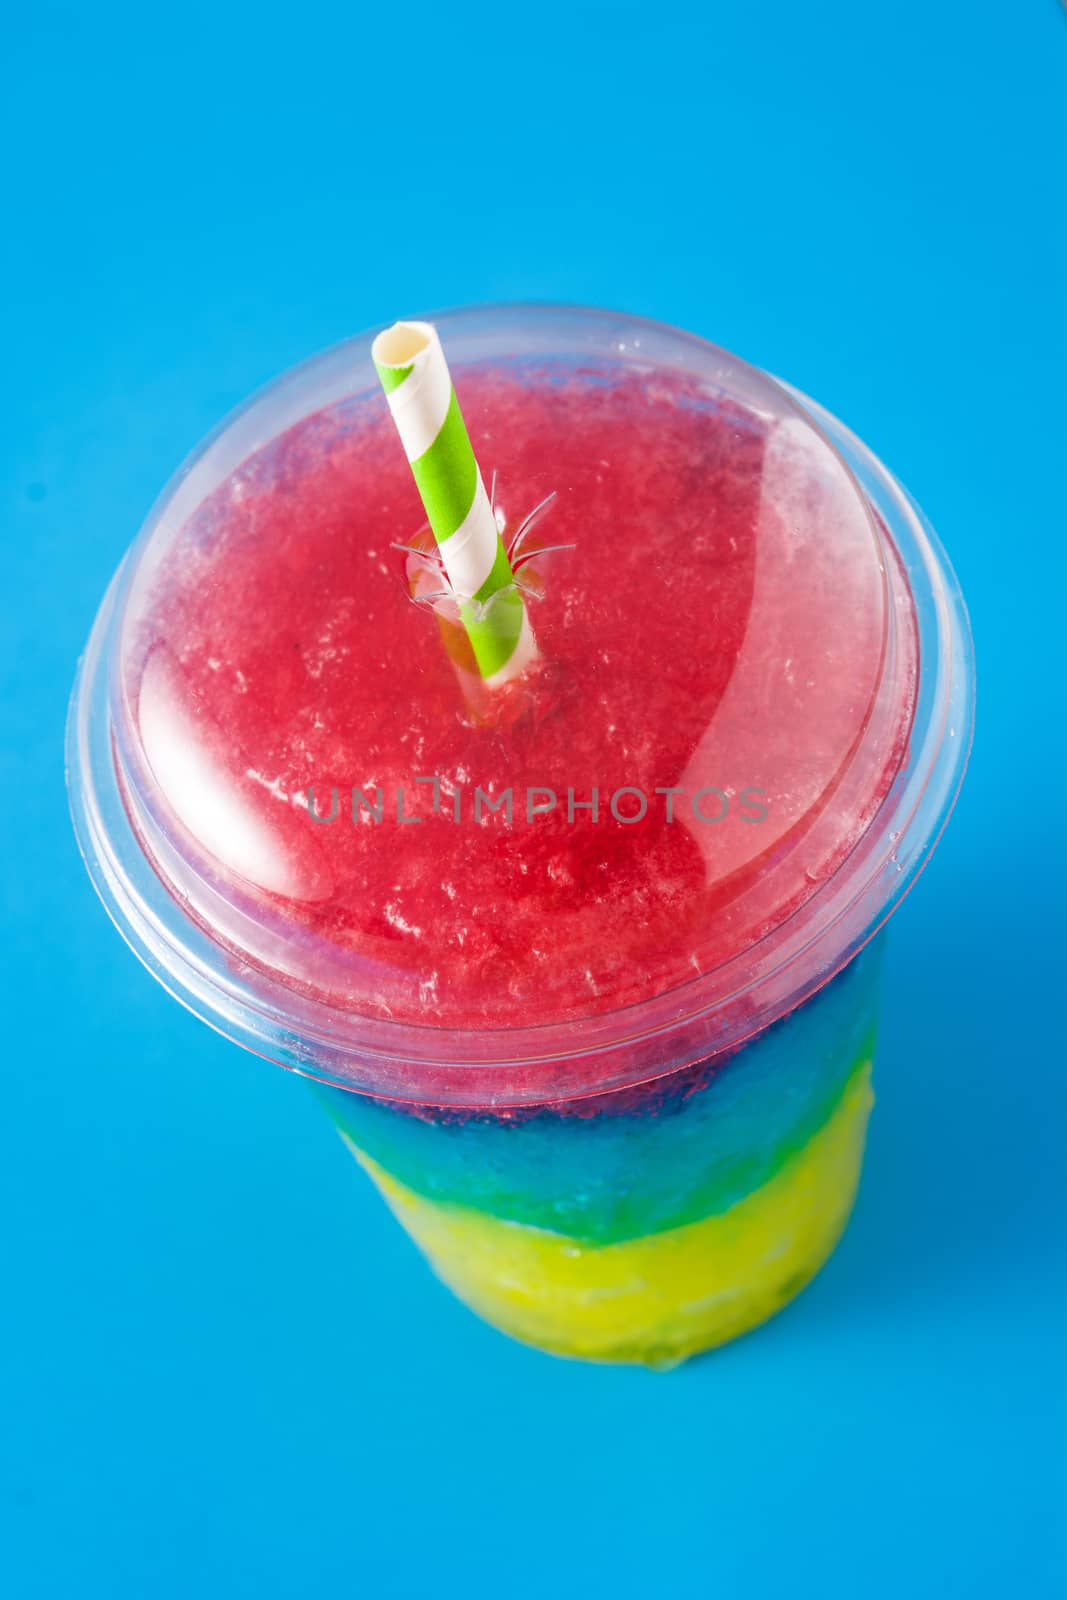 Colorful slushie of differents flavors  by chandlervid85